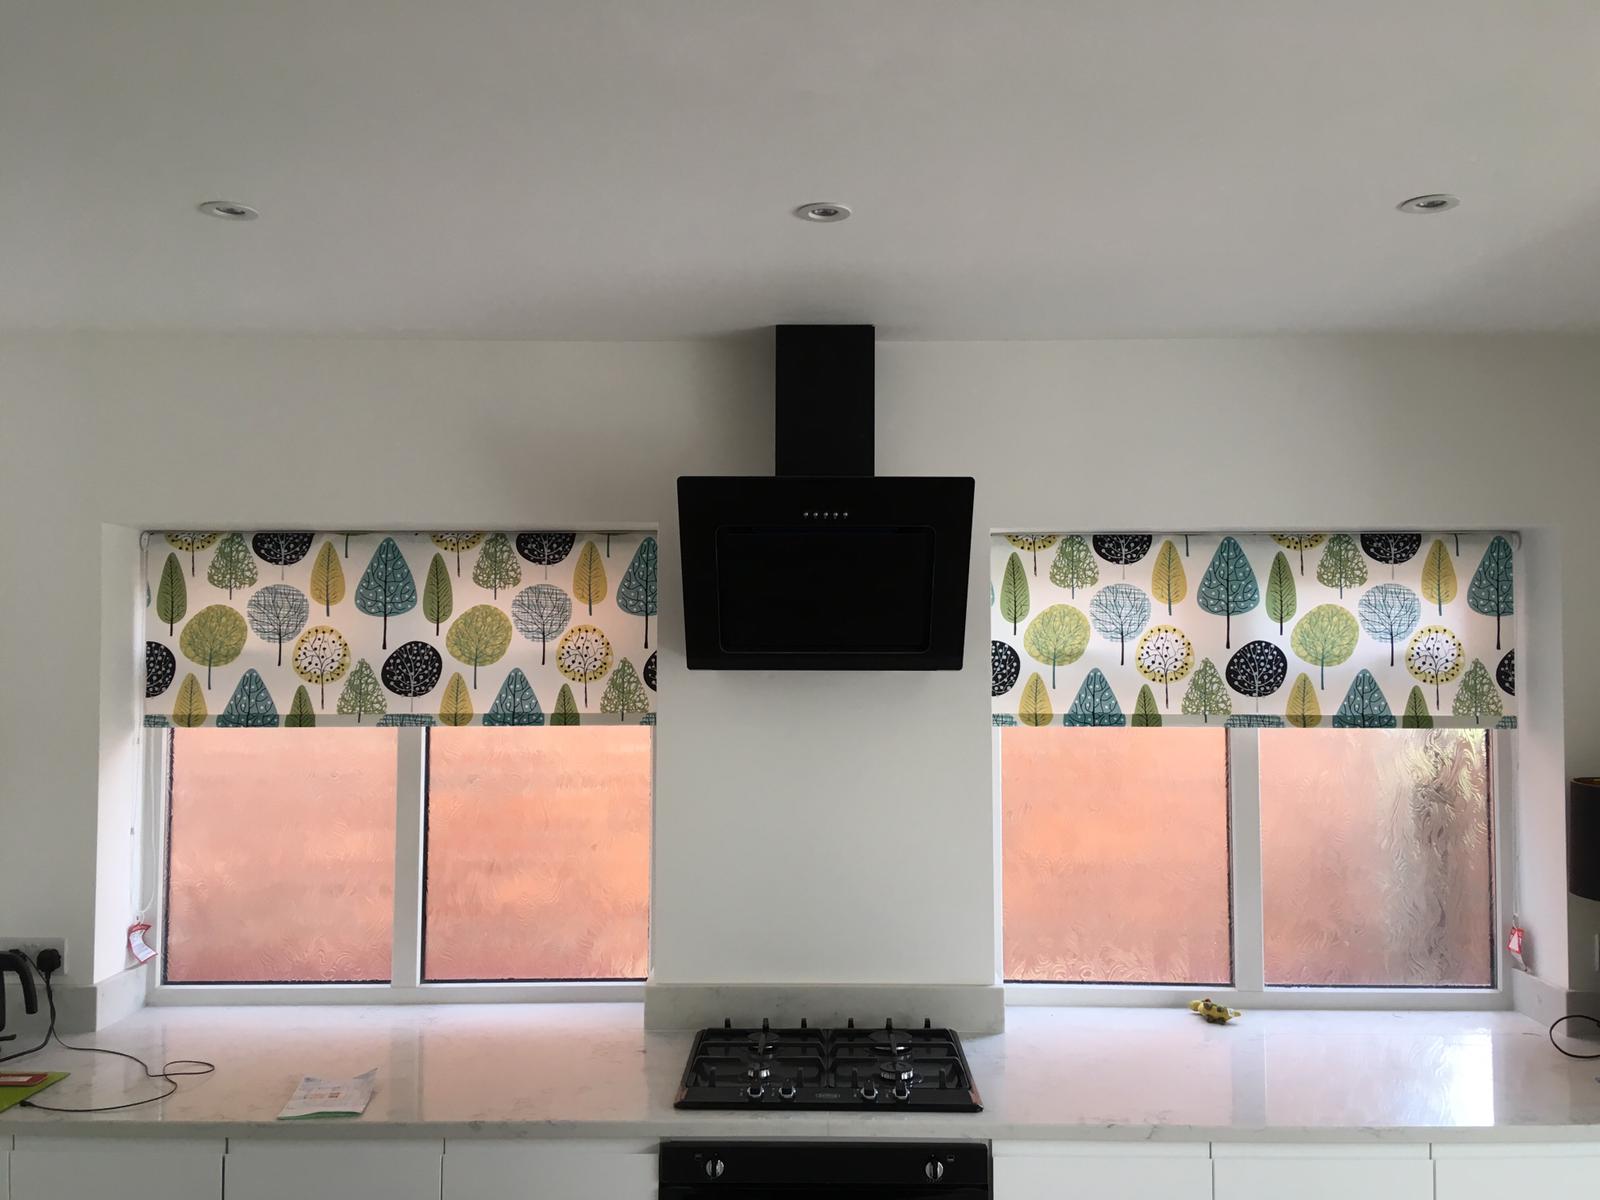 UK Suppliers of Plain Roller Blinds For Minimalist Decor